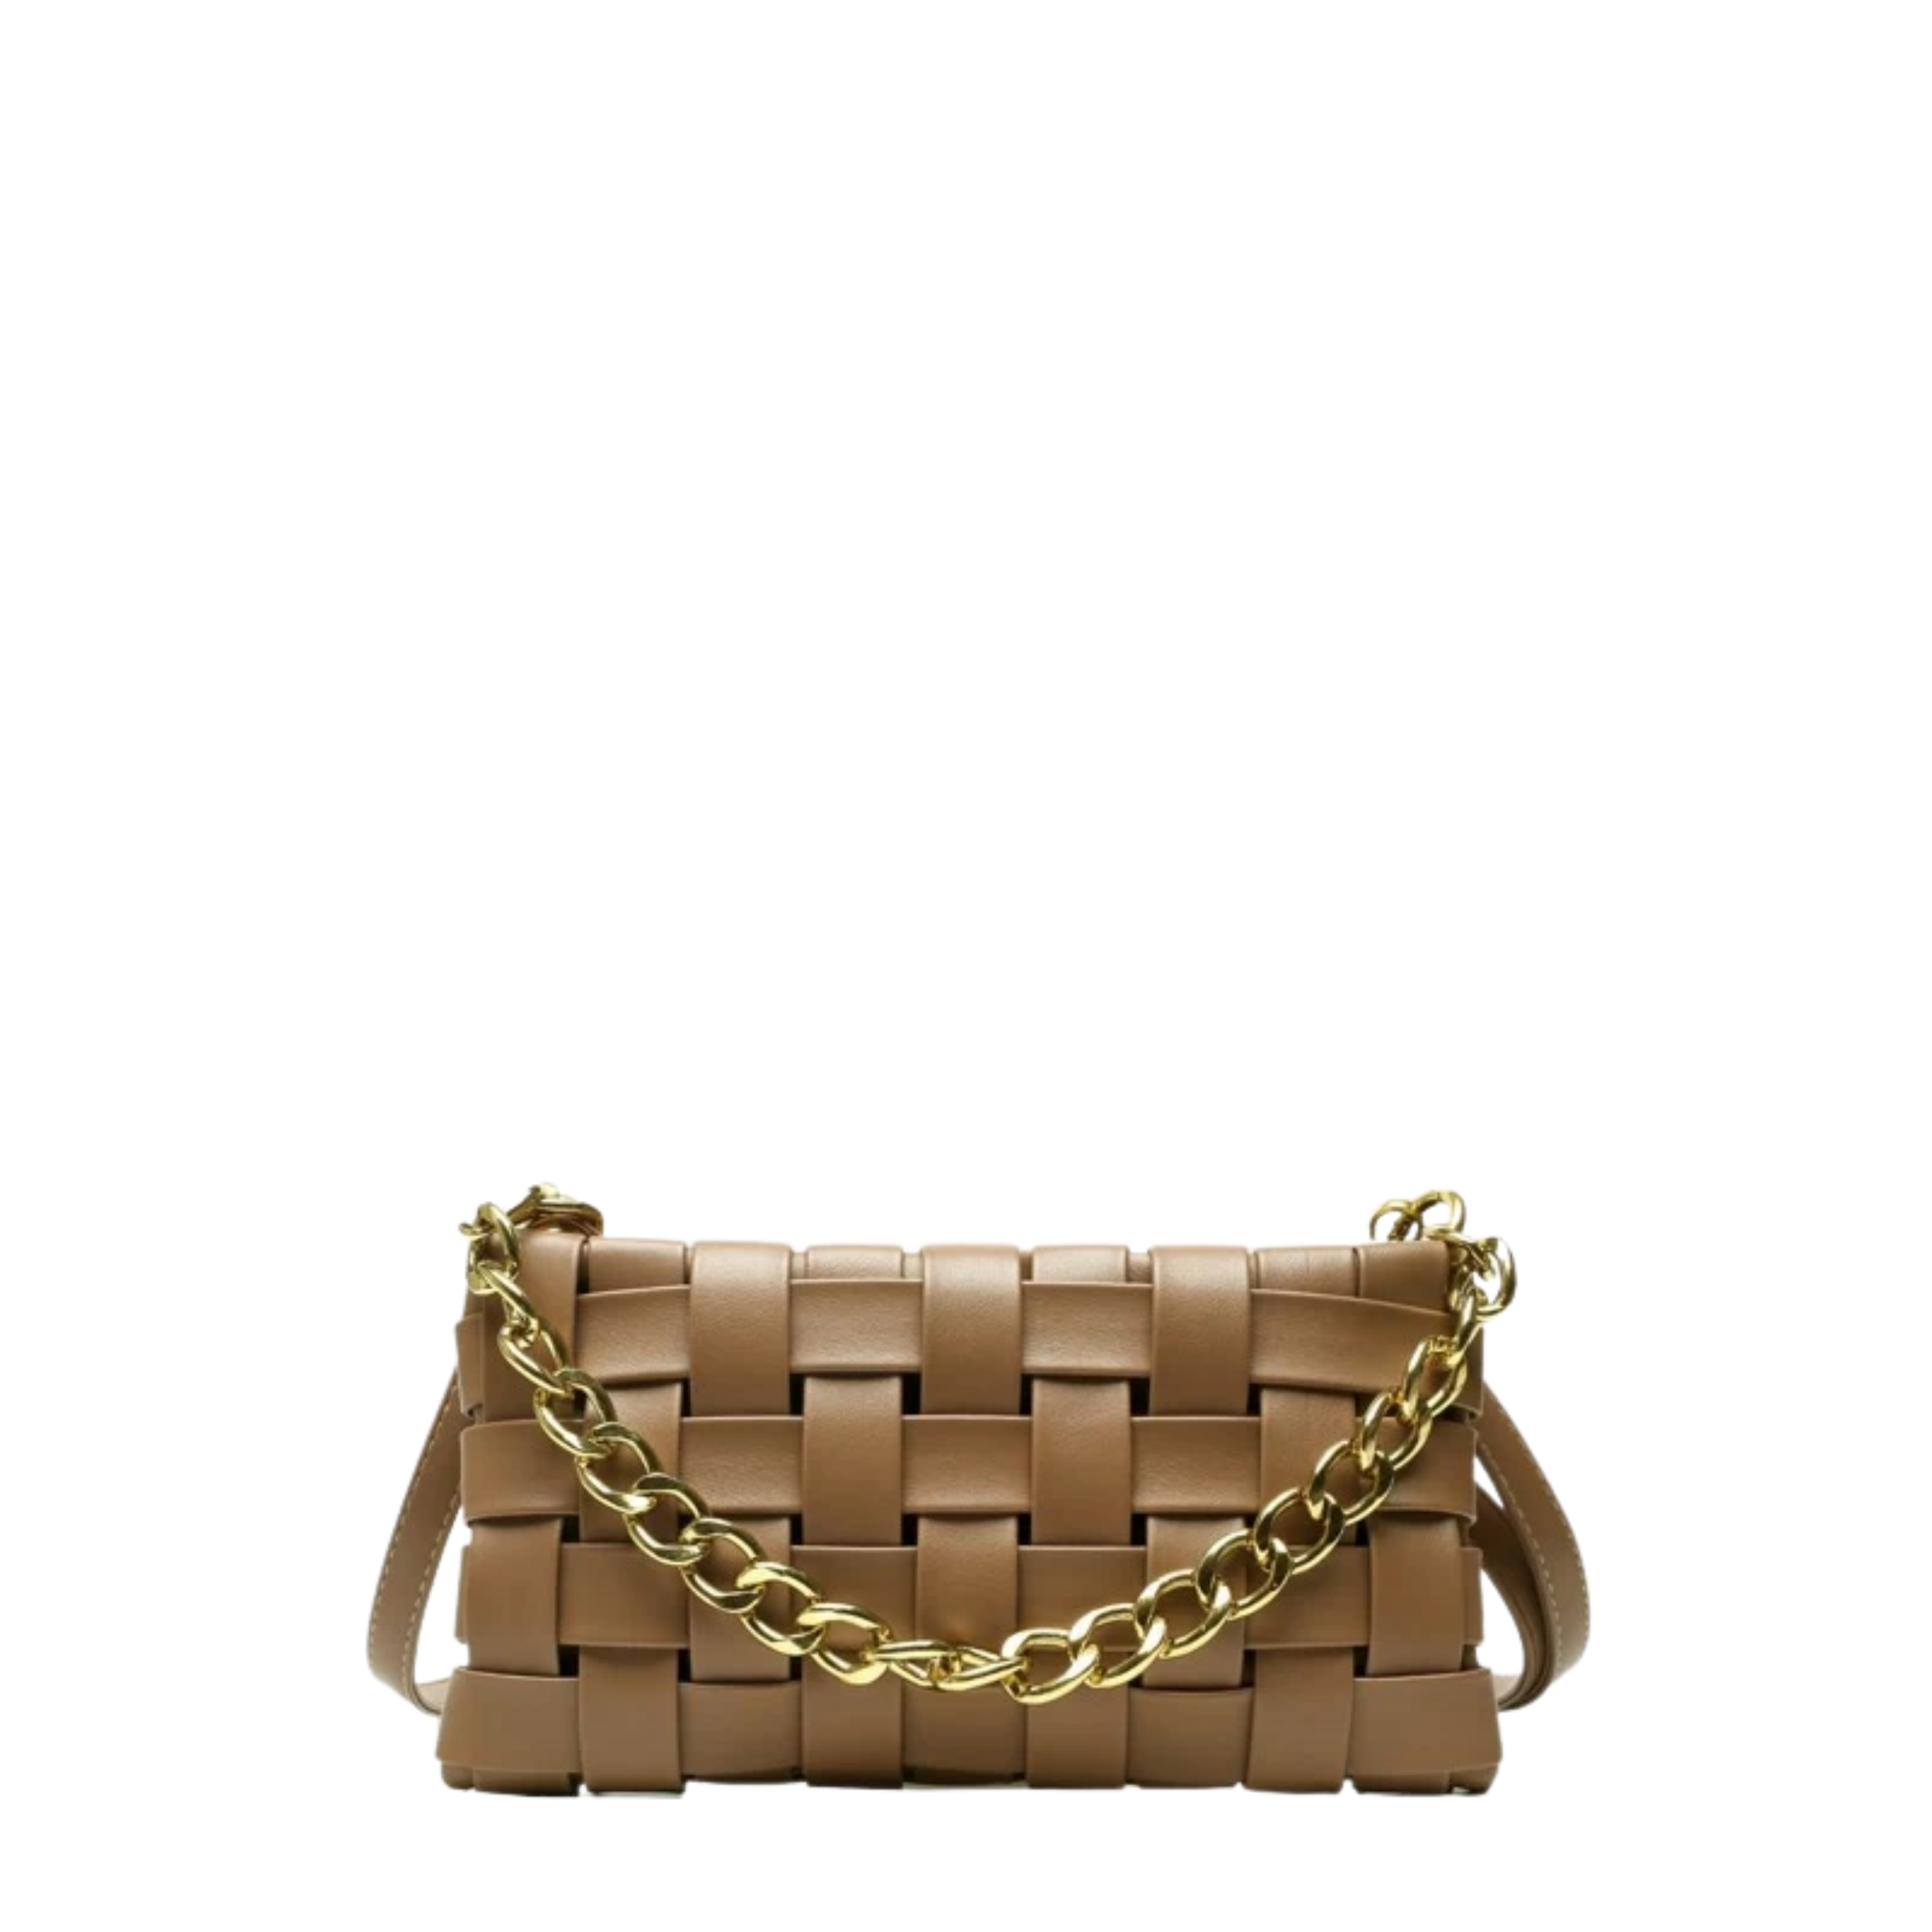 The Champaign Bag Small Braided — Classic Boho Bags